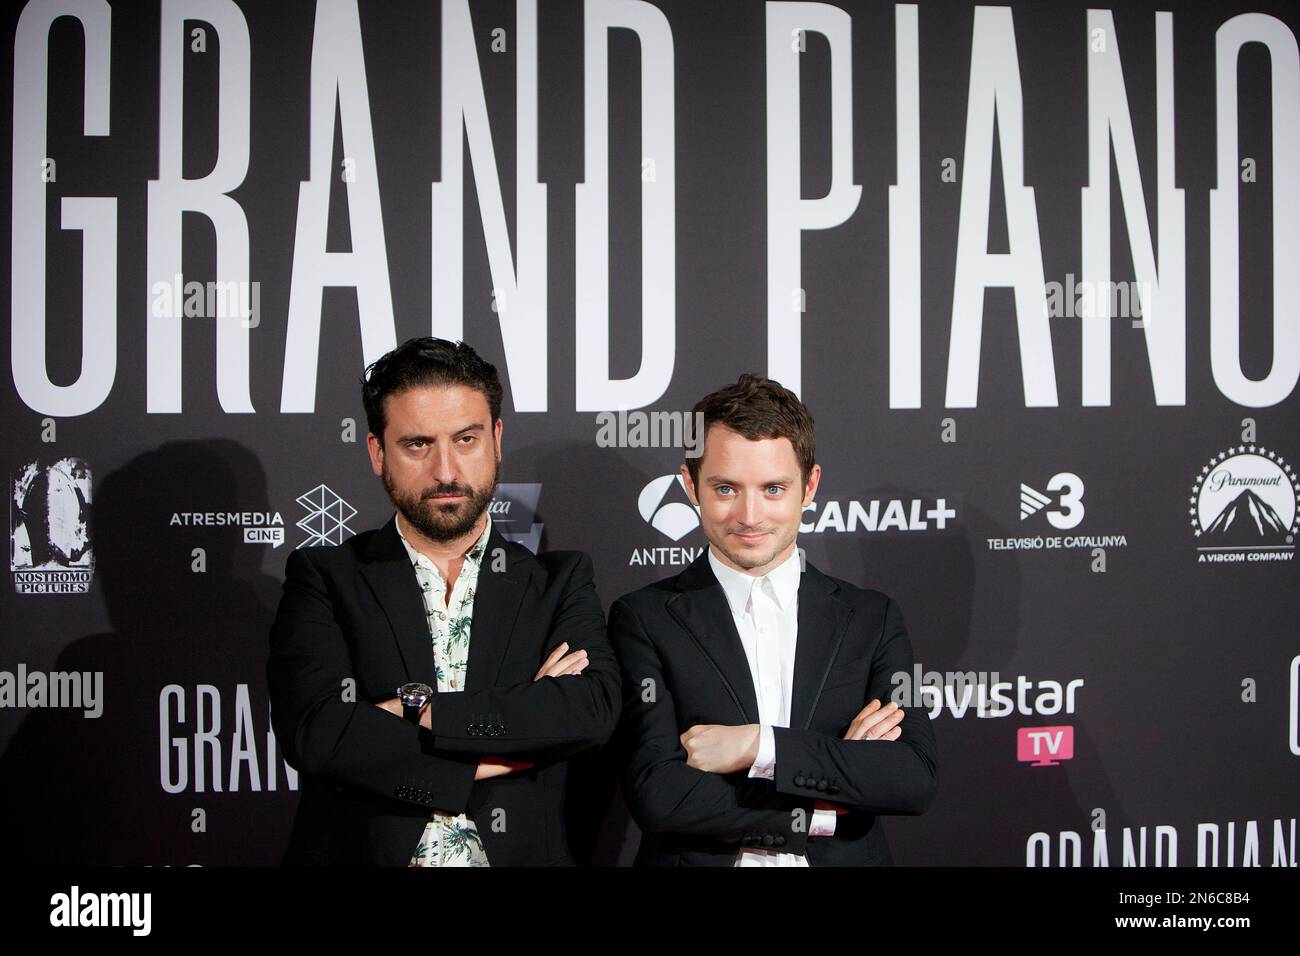 Spanish director Eugenio Mira (L) and U.S. actor Elijah Wood (R) pose at  the premiere of the film 'Grand Piano' at the Callao cinema in Madrid,  Spain, Thursday Oct 15, 2013. (AP